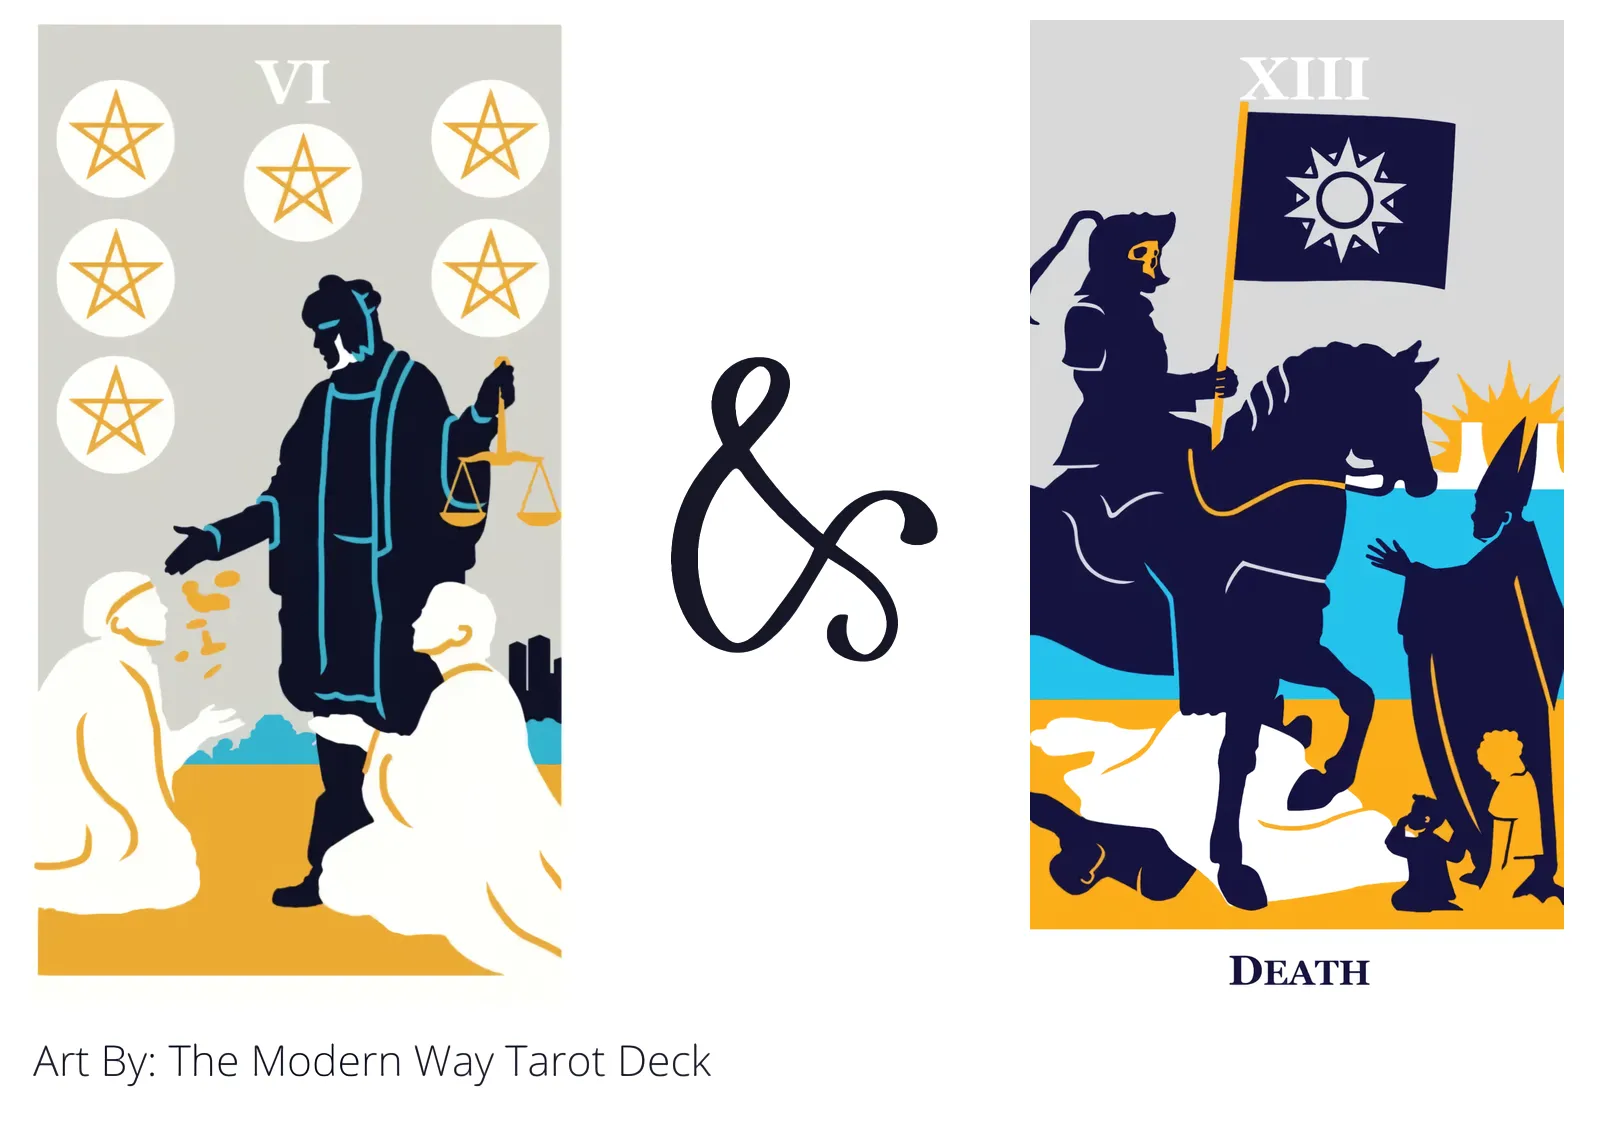 six of pentacles and death tarot cards together